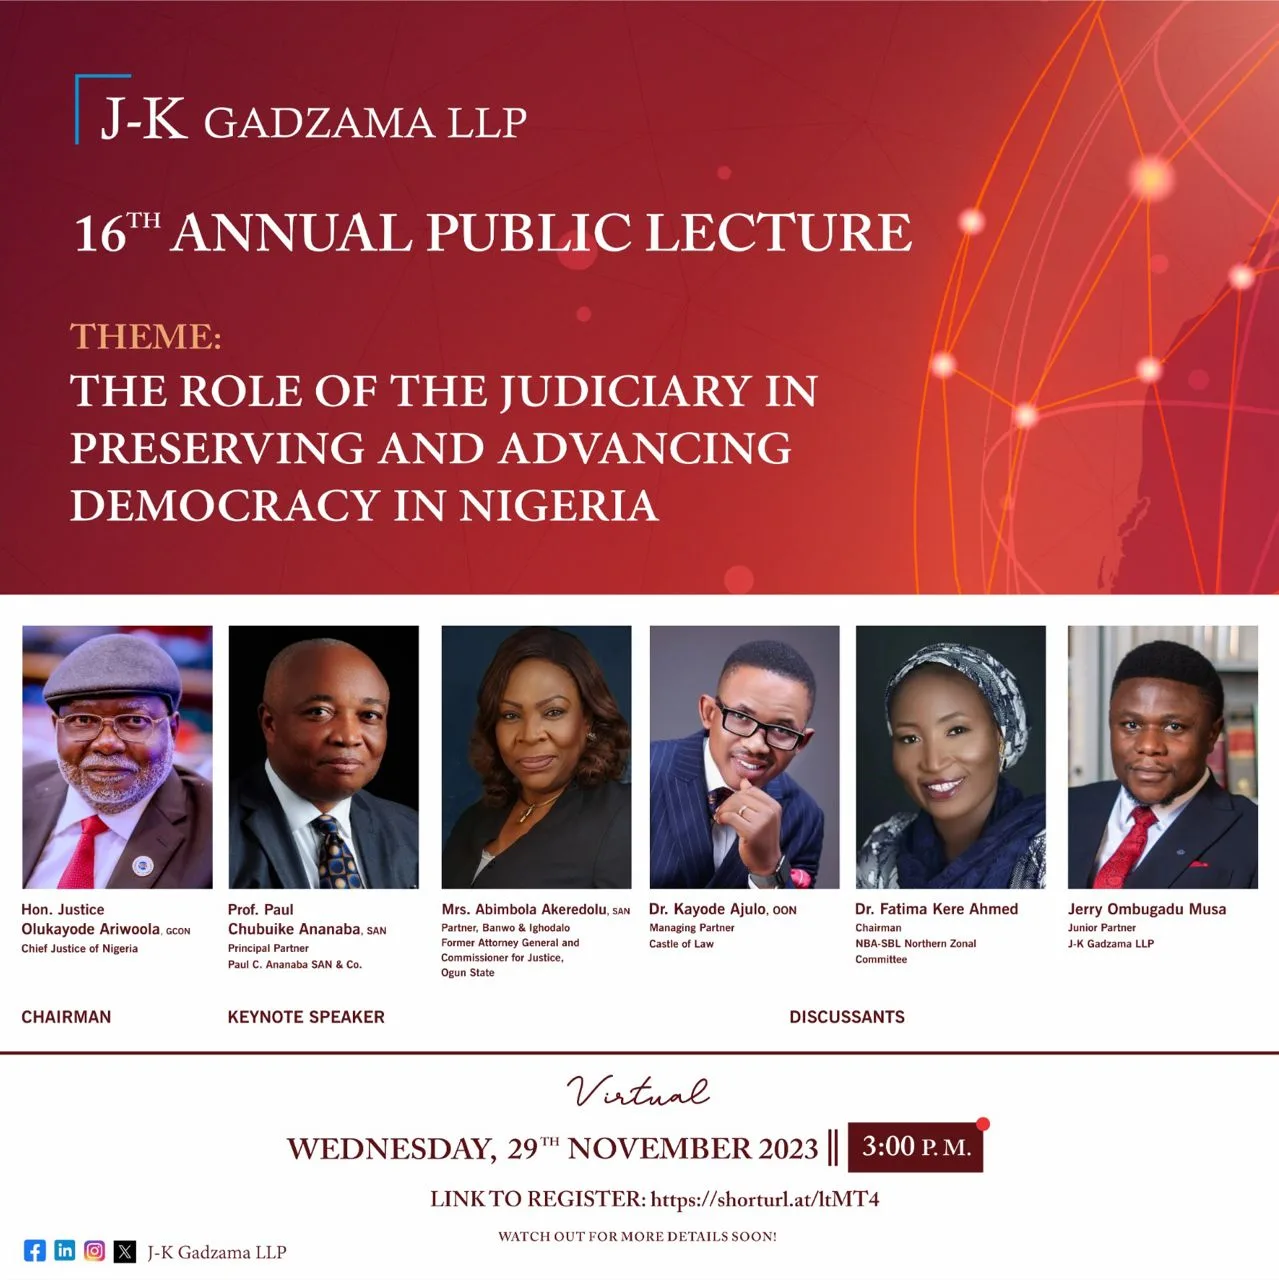 CJN to Chair J-K Gadzama LLP 16th Annual Lecture Today